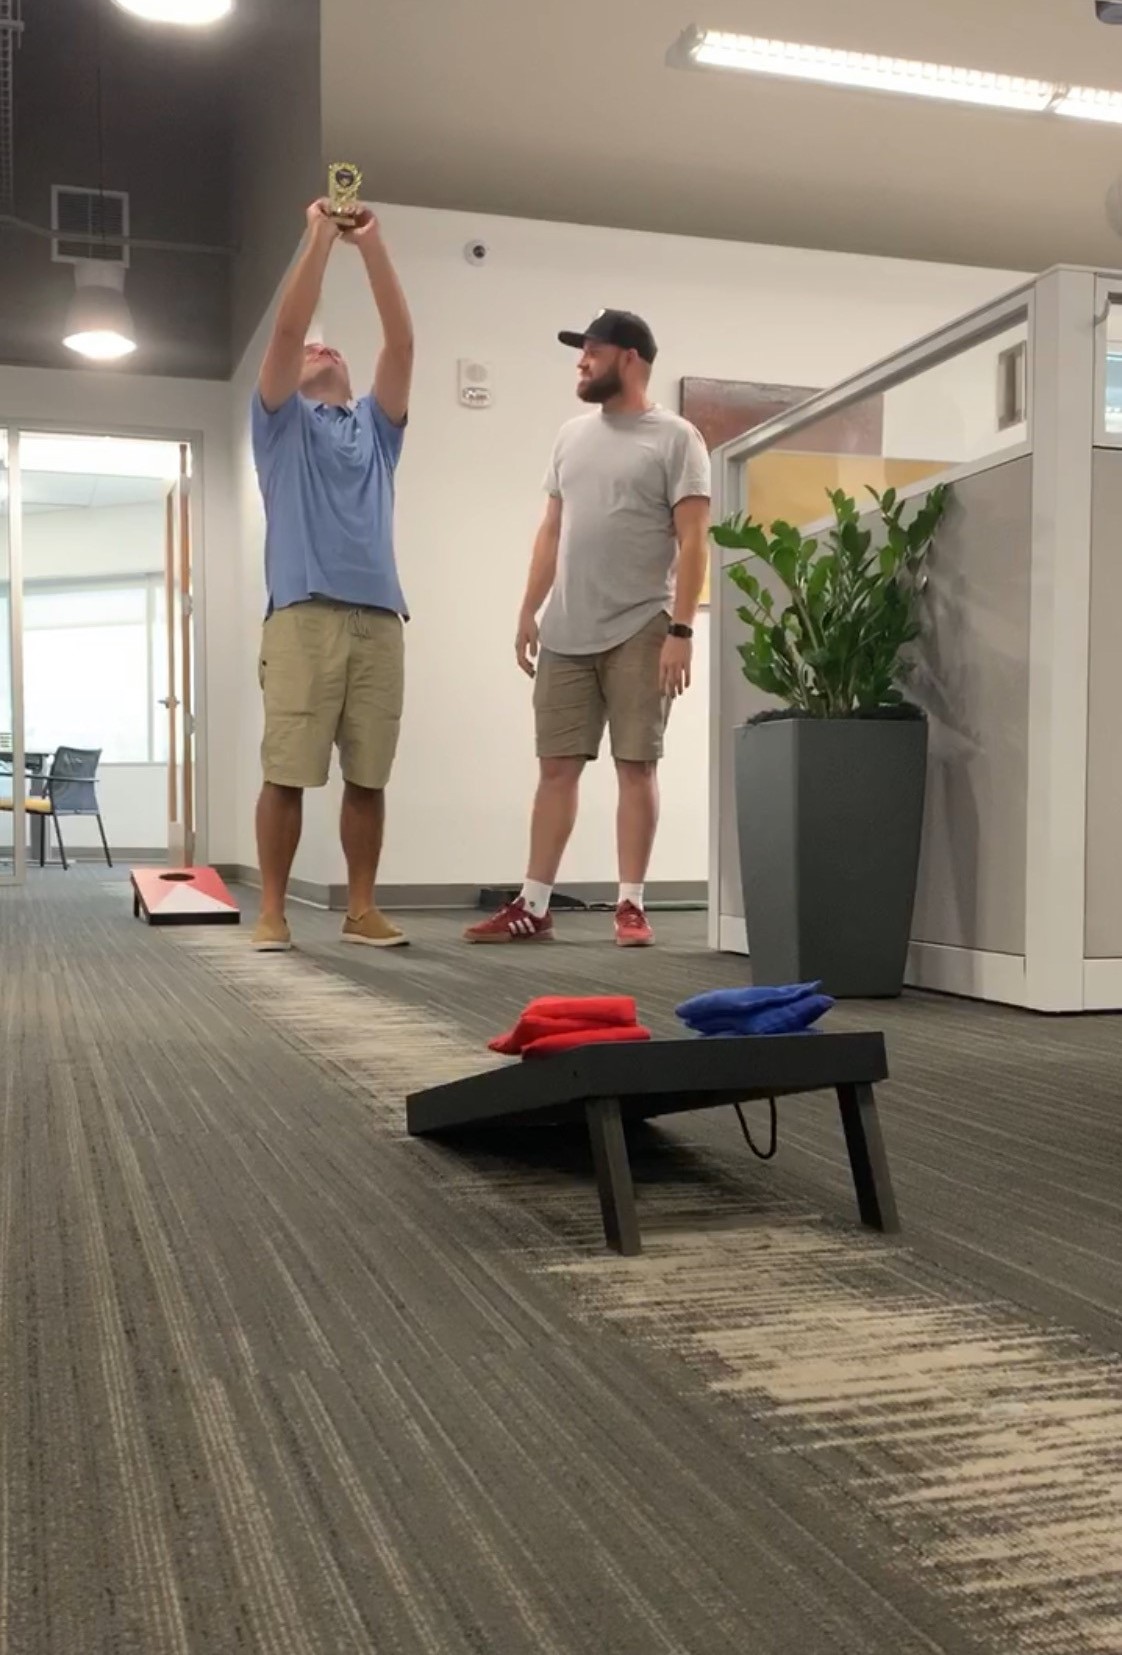 We work hard at Strata, but we do it while having a ton of fun.  Current cornhole champ is Nate, one of the owners.  